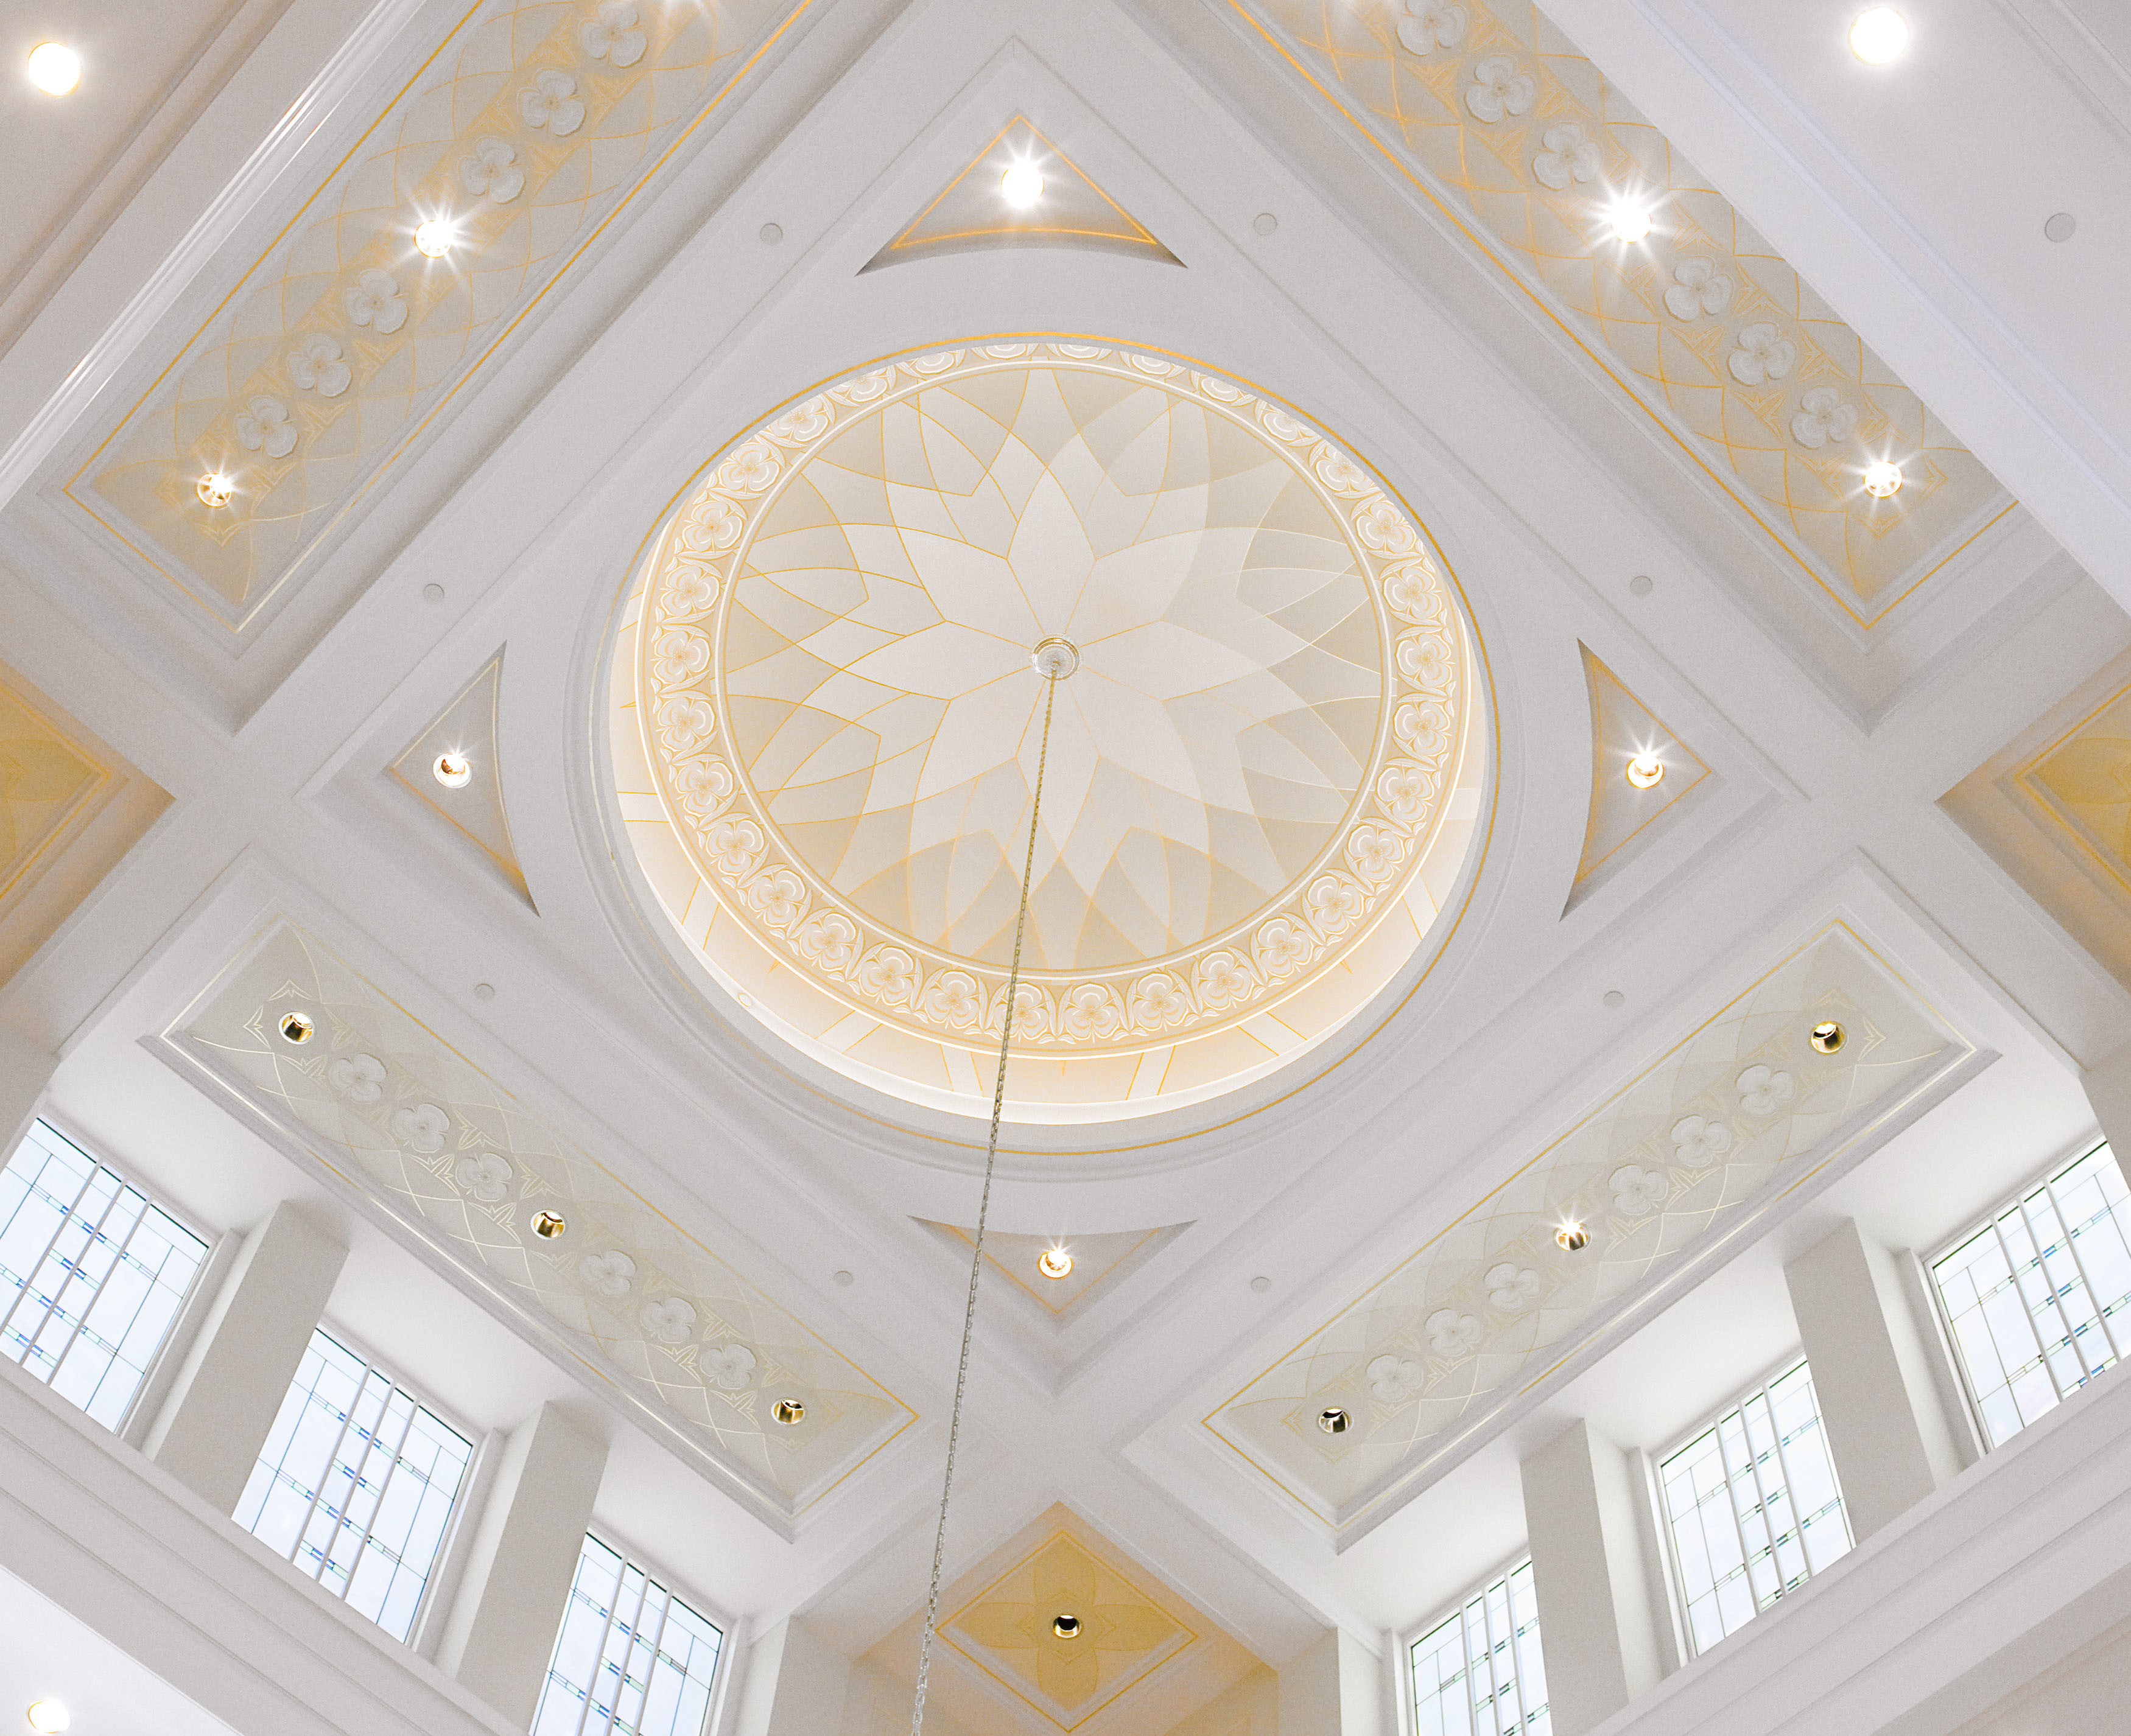 A large white room with a golden-colored dome on the ceiling and a glass chandelier hanging from it.